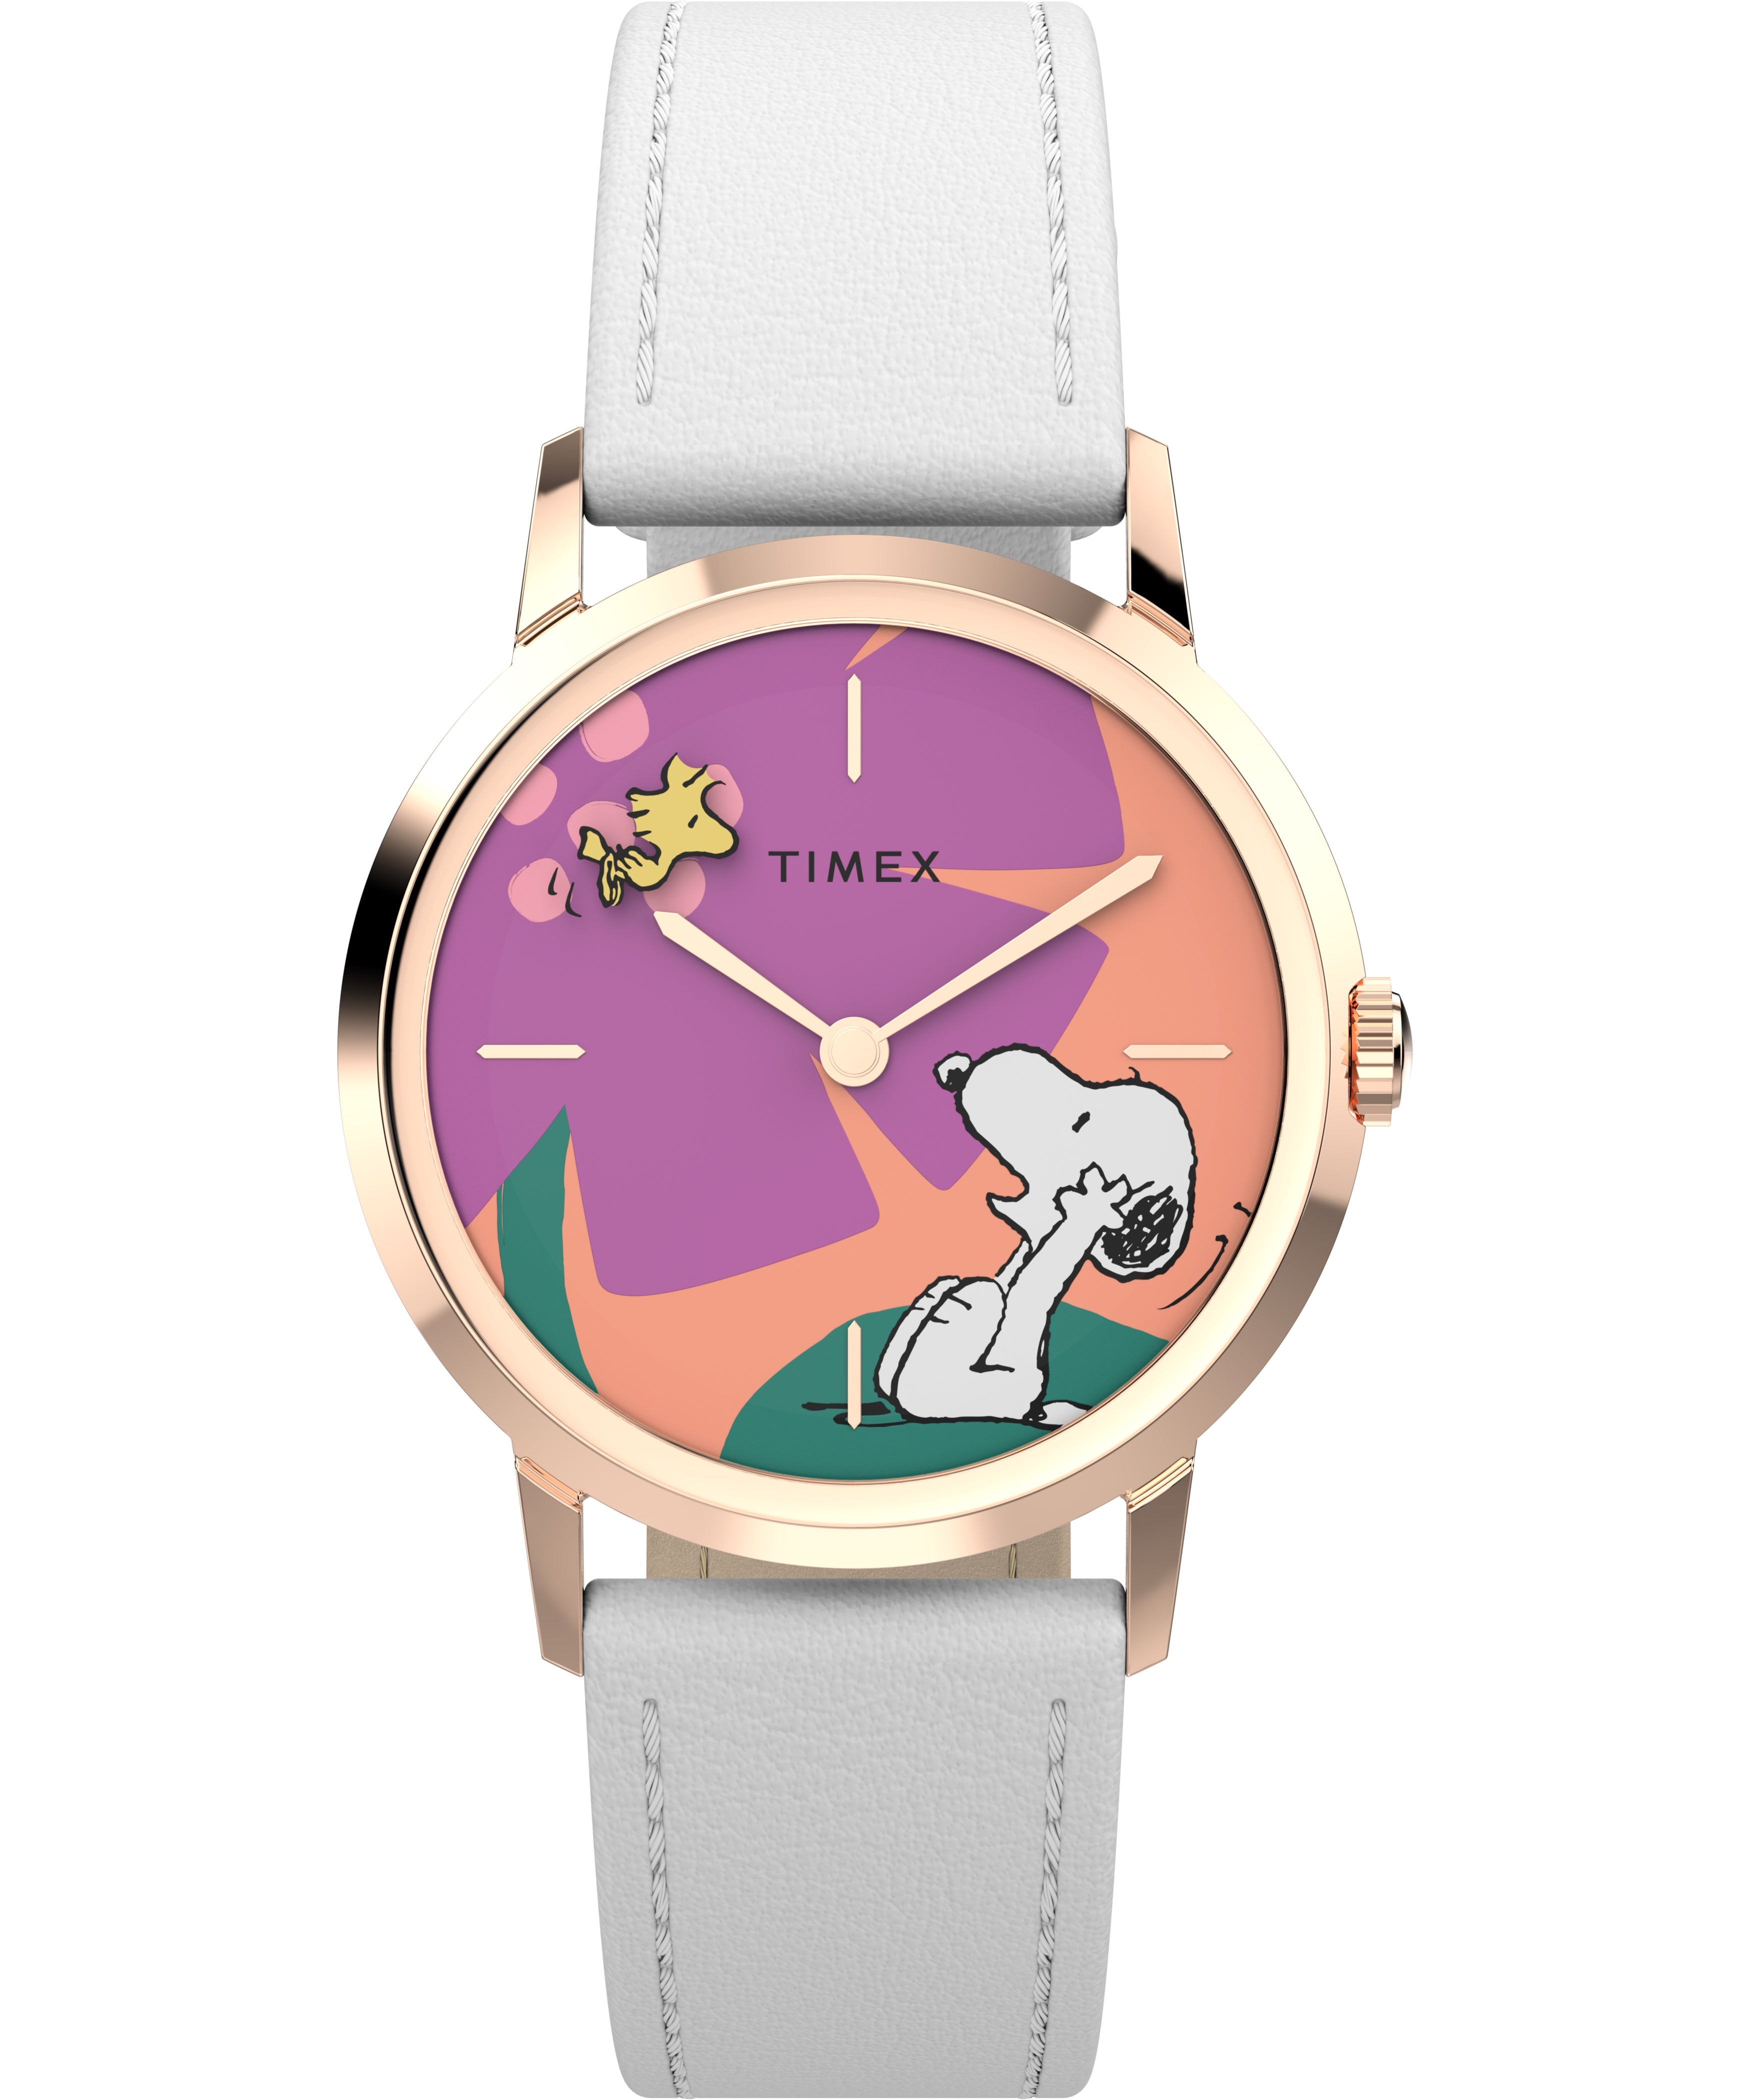 Timex Marlin Snoopy Rose Gold Watch